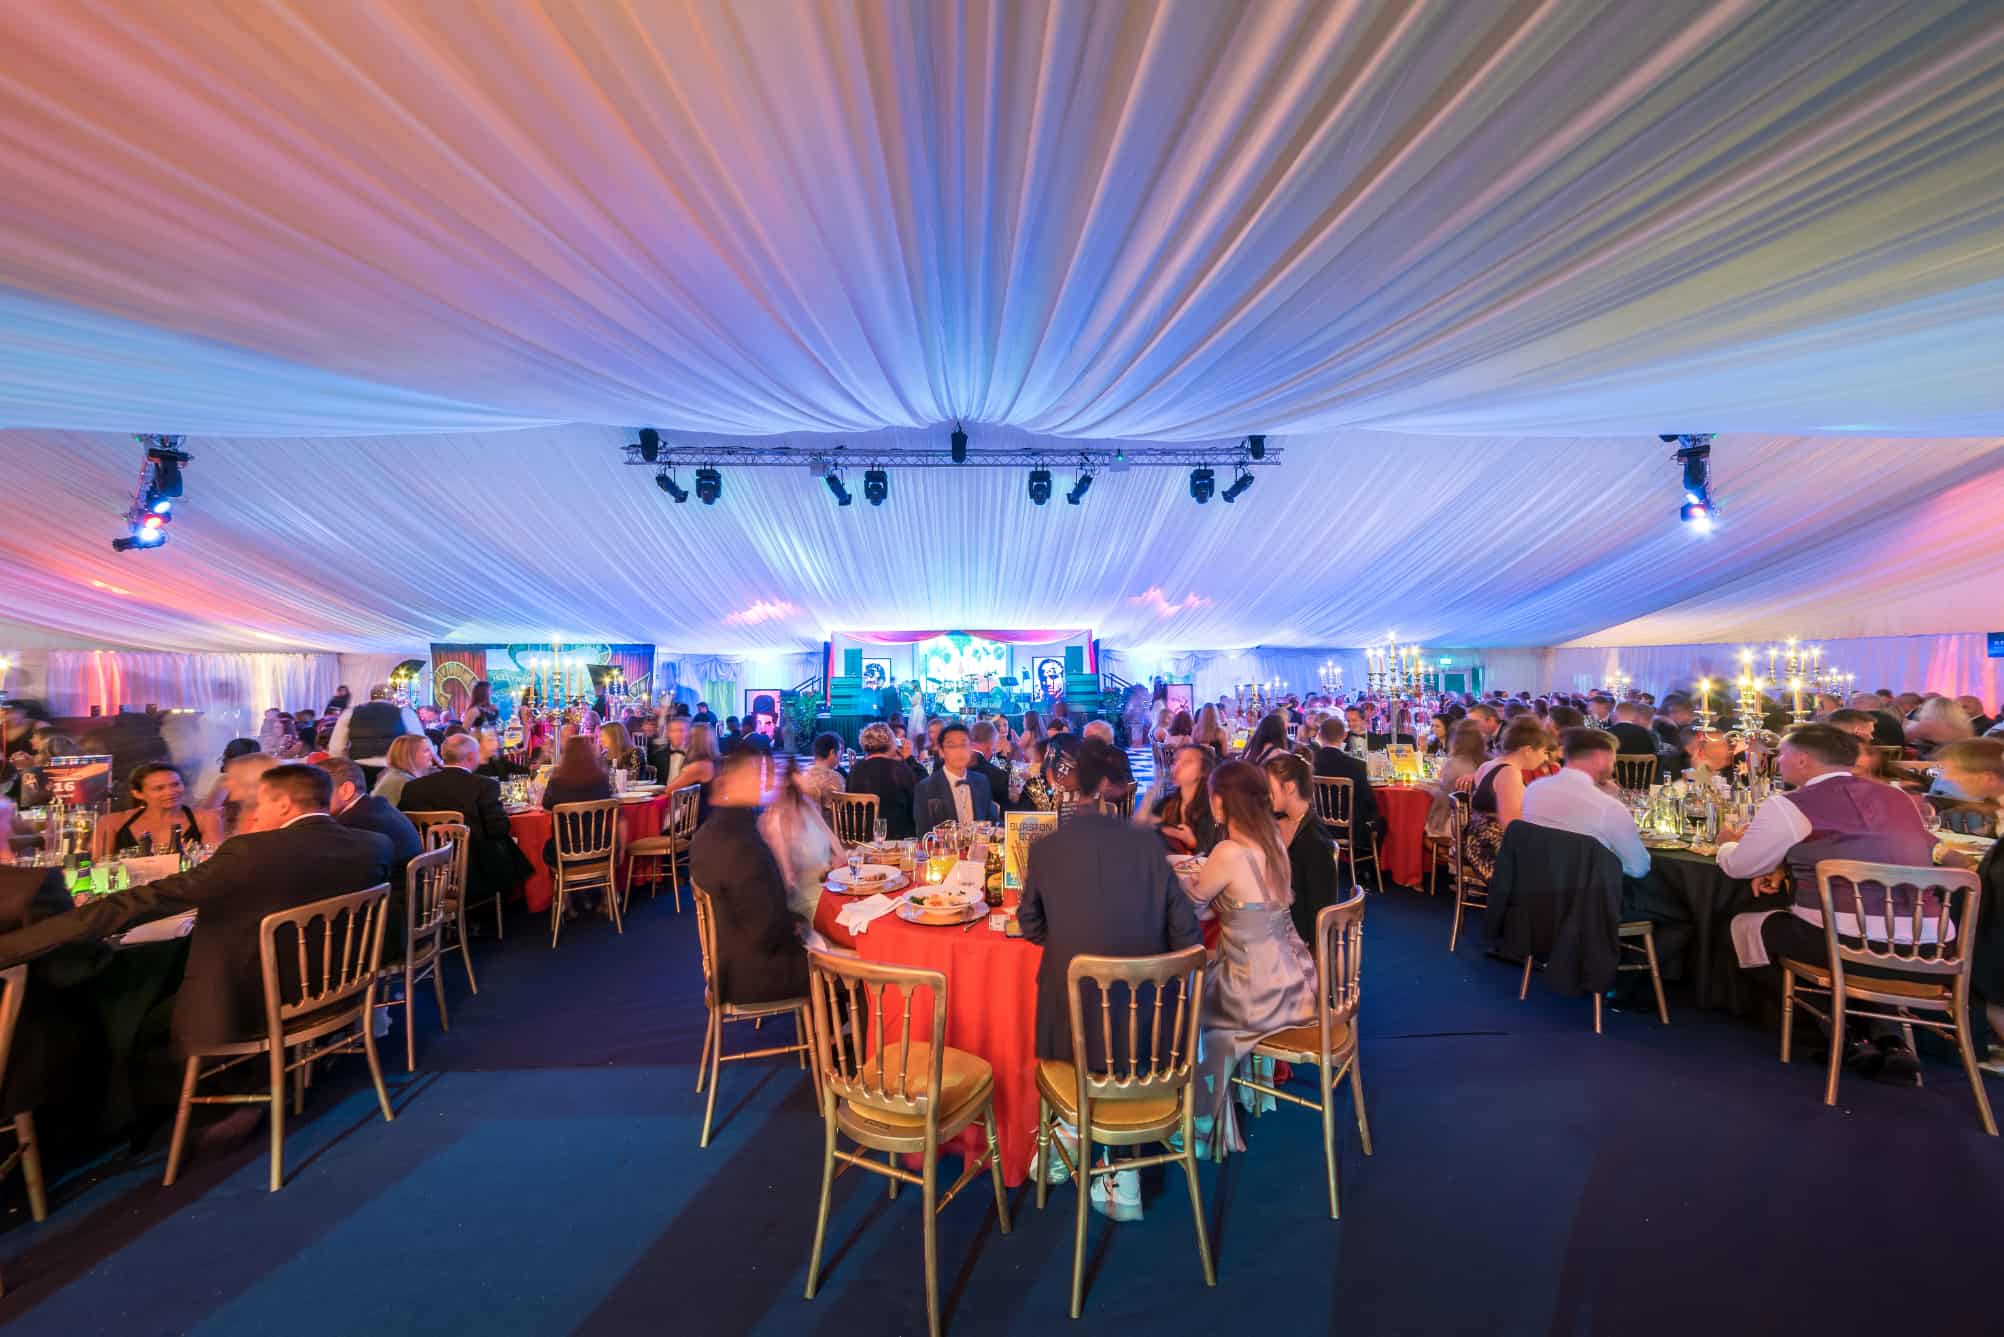 Within the marquee at Clifton College